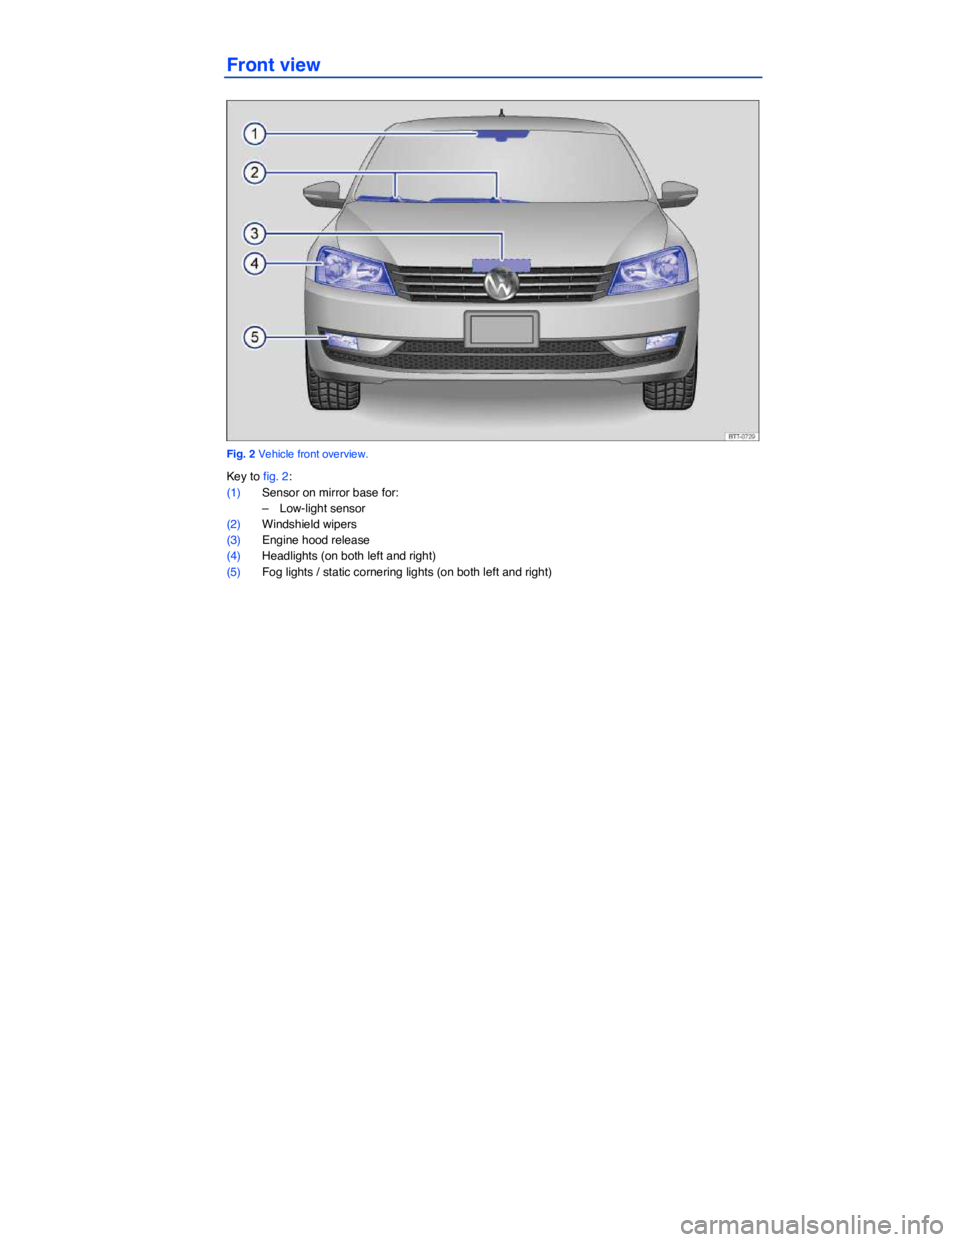 VOLKSWAGEN PASSAT 2008  Owners Manual  
Front view 
 
Fig. 2 Vehicle front overview. 
Key to fig. 2: 
(1) Sensor on mirror base for: 
–  Low-light sensor  
(2) Windshield wipers  
(3) Engine hood release  
(4) Headlights (on both left a